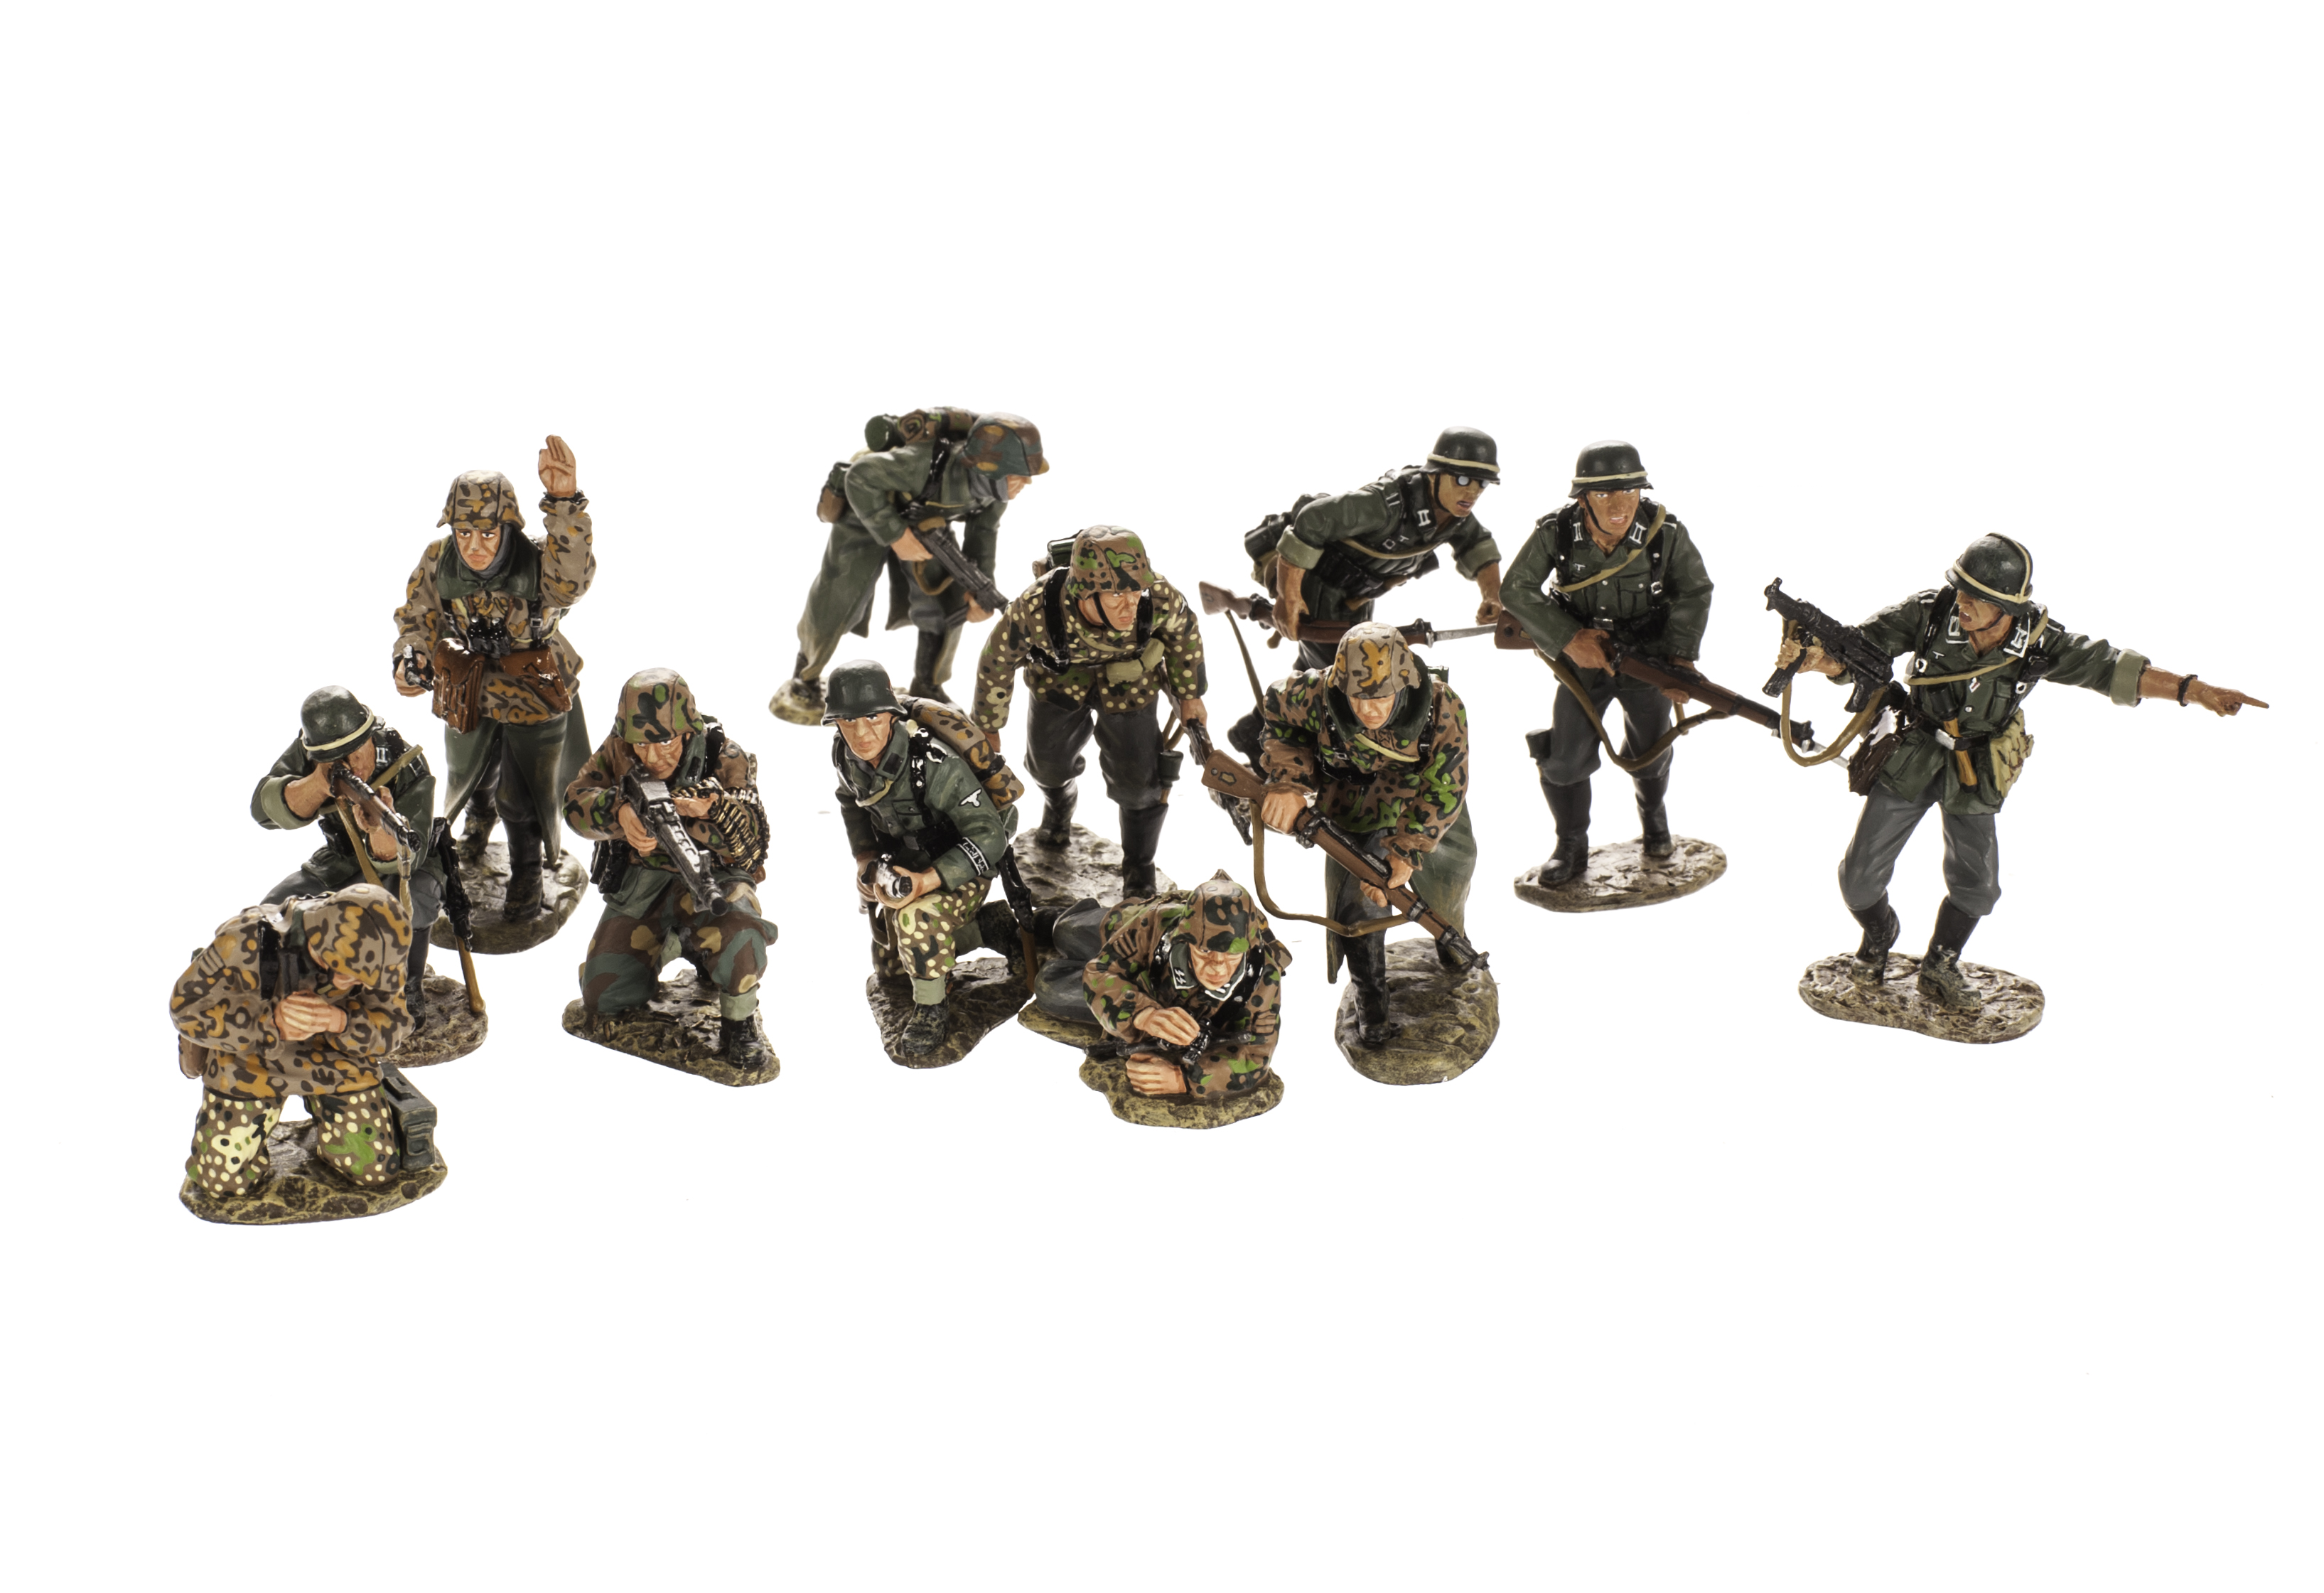 King & Country German forces WSS39 (4), WSS48 (4), WSS51 (4), G-VG, 1 F, (12), 1 figure with paint